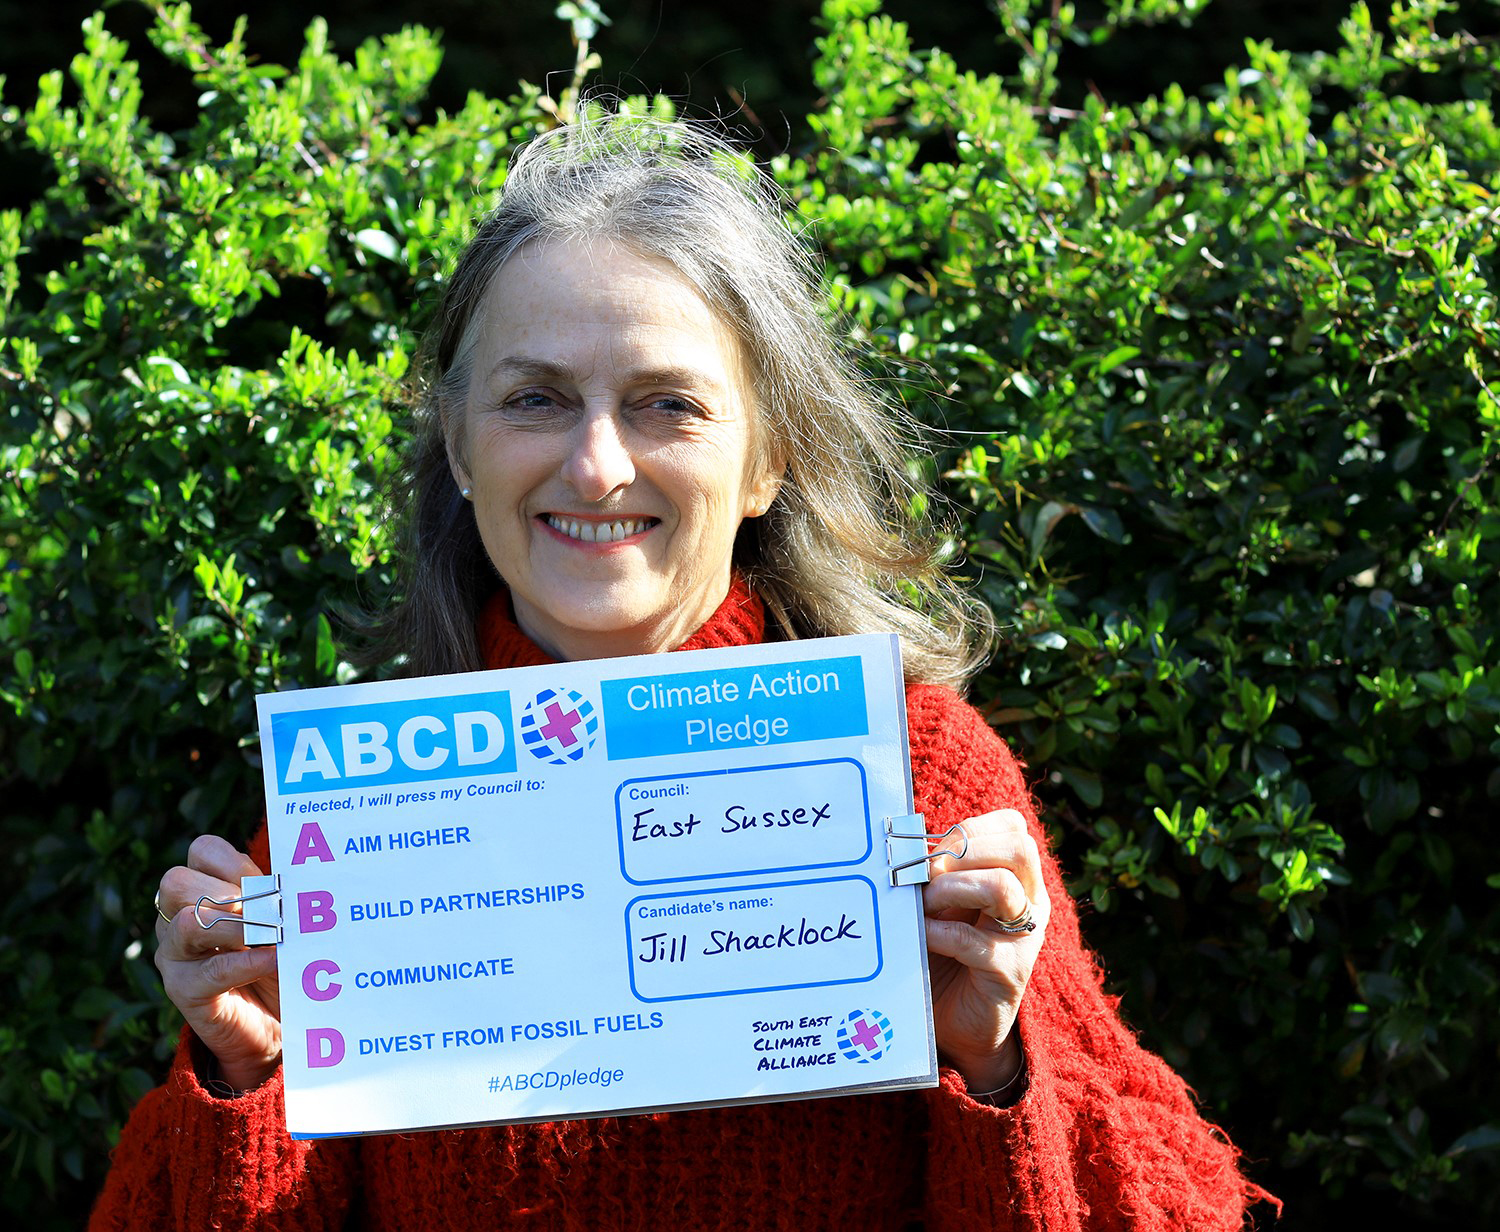 Jill Shacklock holding up the ABCD Climate Action Pledge to Aim Higher, Build Partnerships, Communicate, Divest from Fossil fuels